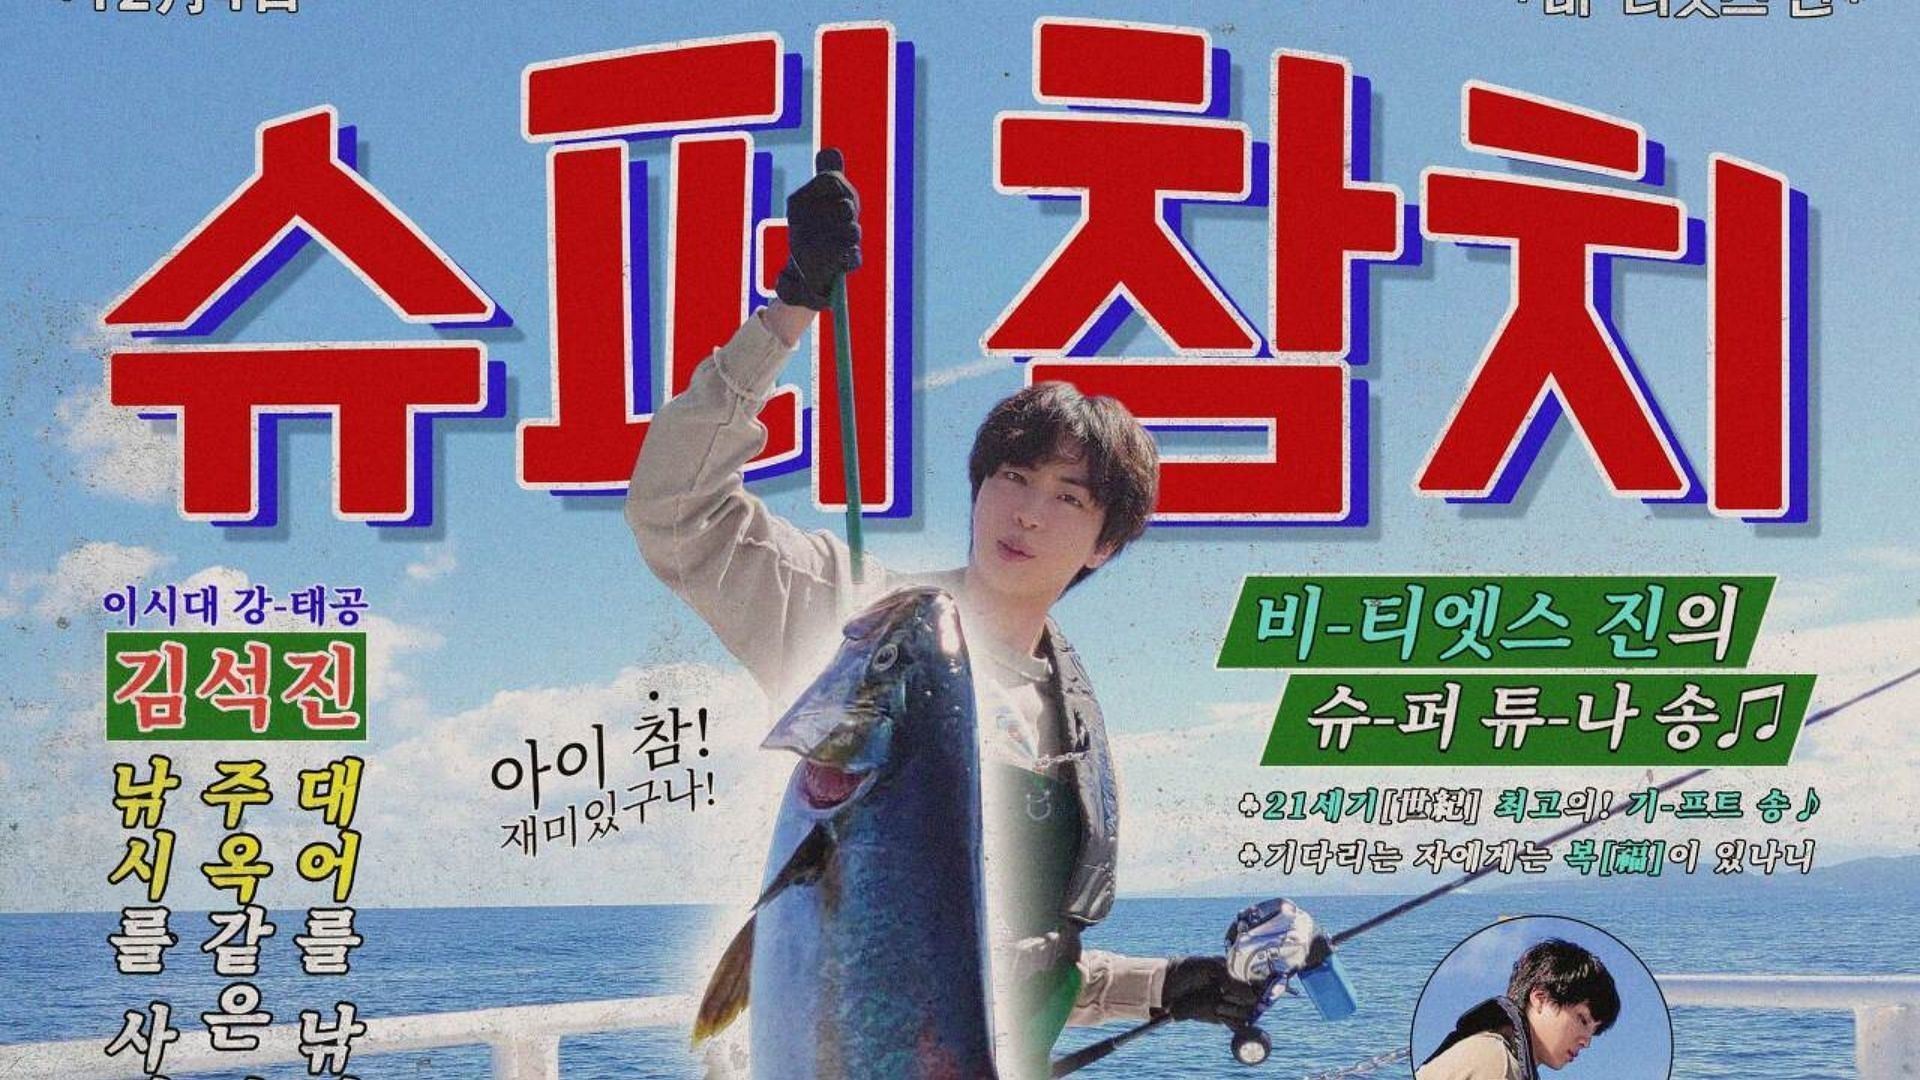 BTS Jin's 'Super Tuna' Was a 'Spontaneous Song' Prompted by a